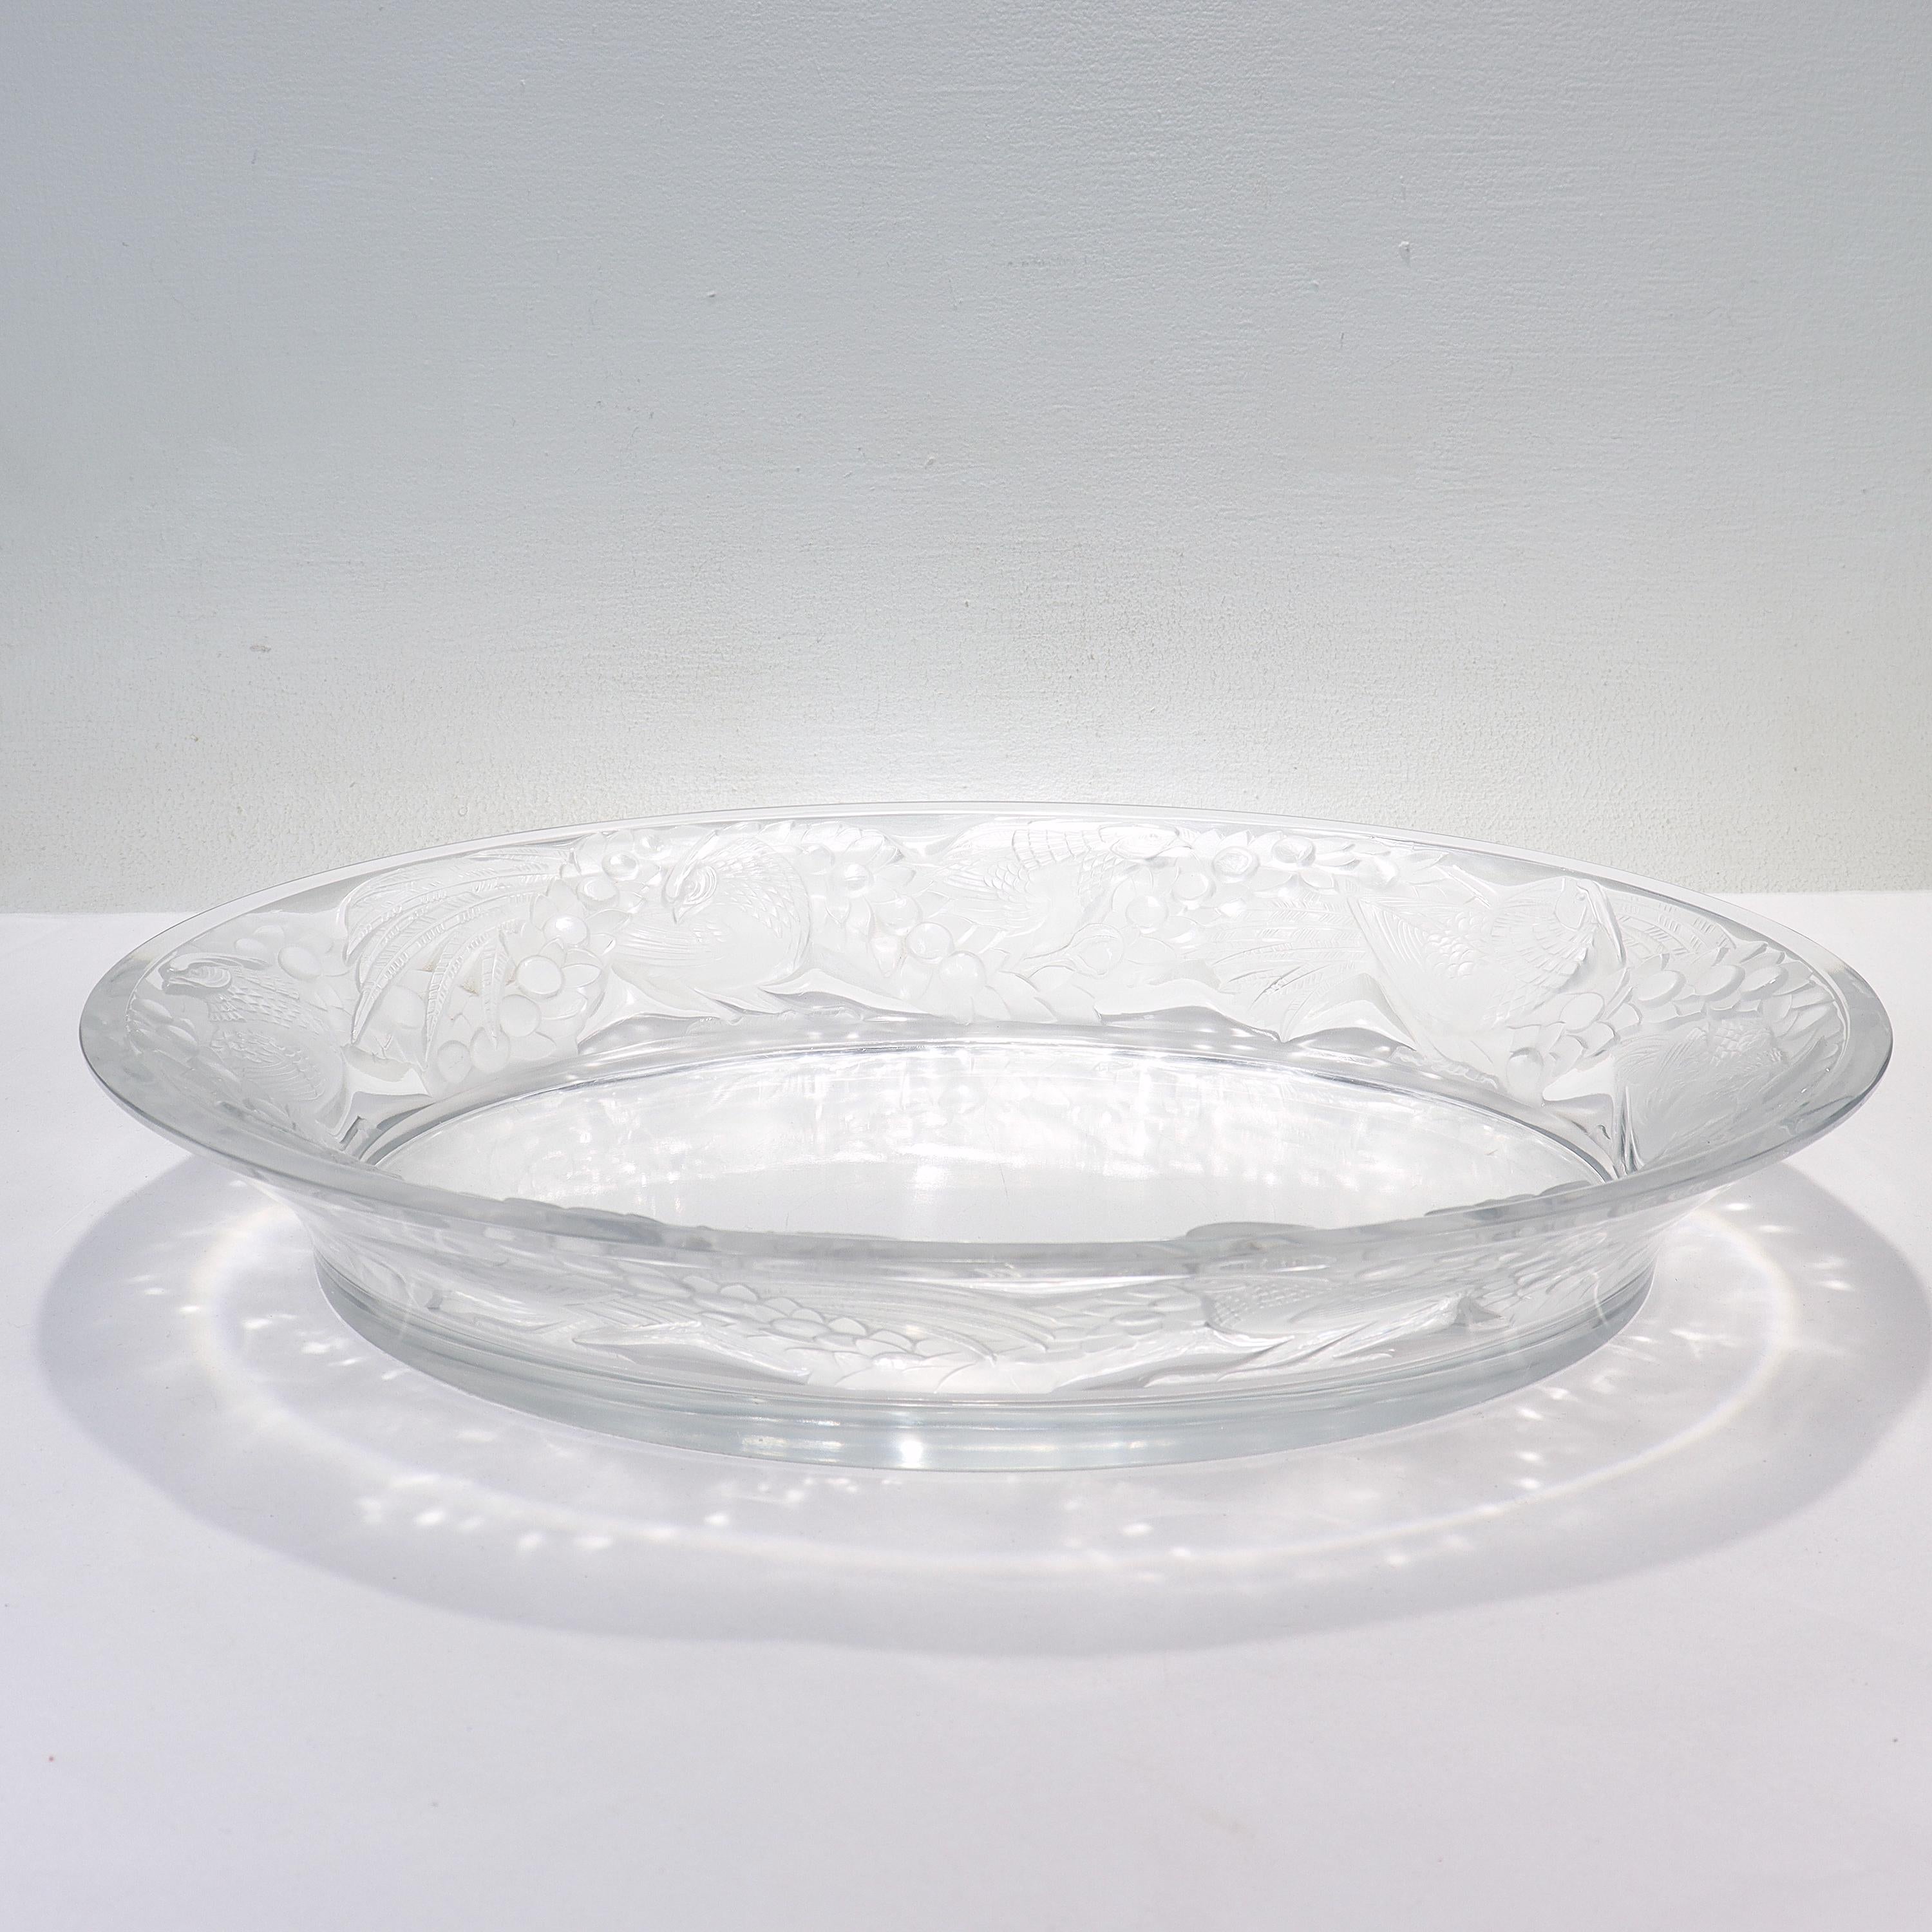 A fine antique art glass bowl.

By Lalique.

In the 'Faisans' pattern. 

With a wide rim decorated with molded pheasants amidst berries and foliage.

Simply a wonderful Lalique art glass bowl!

Date:
20th Century

Overall Condition:
It